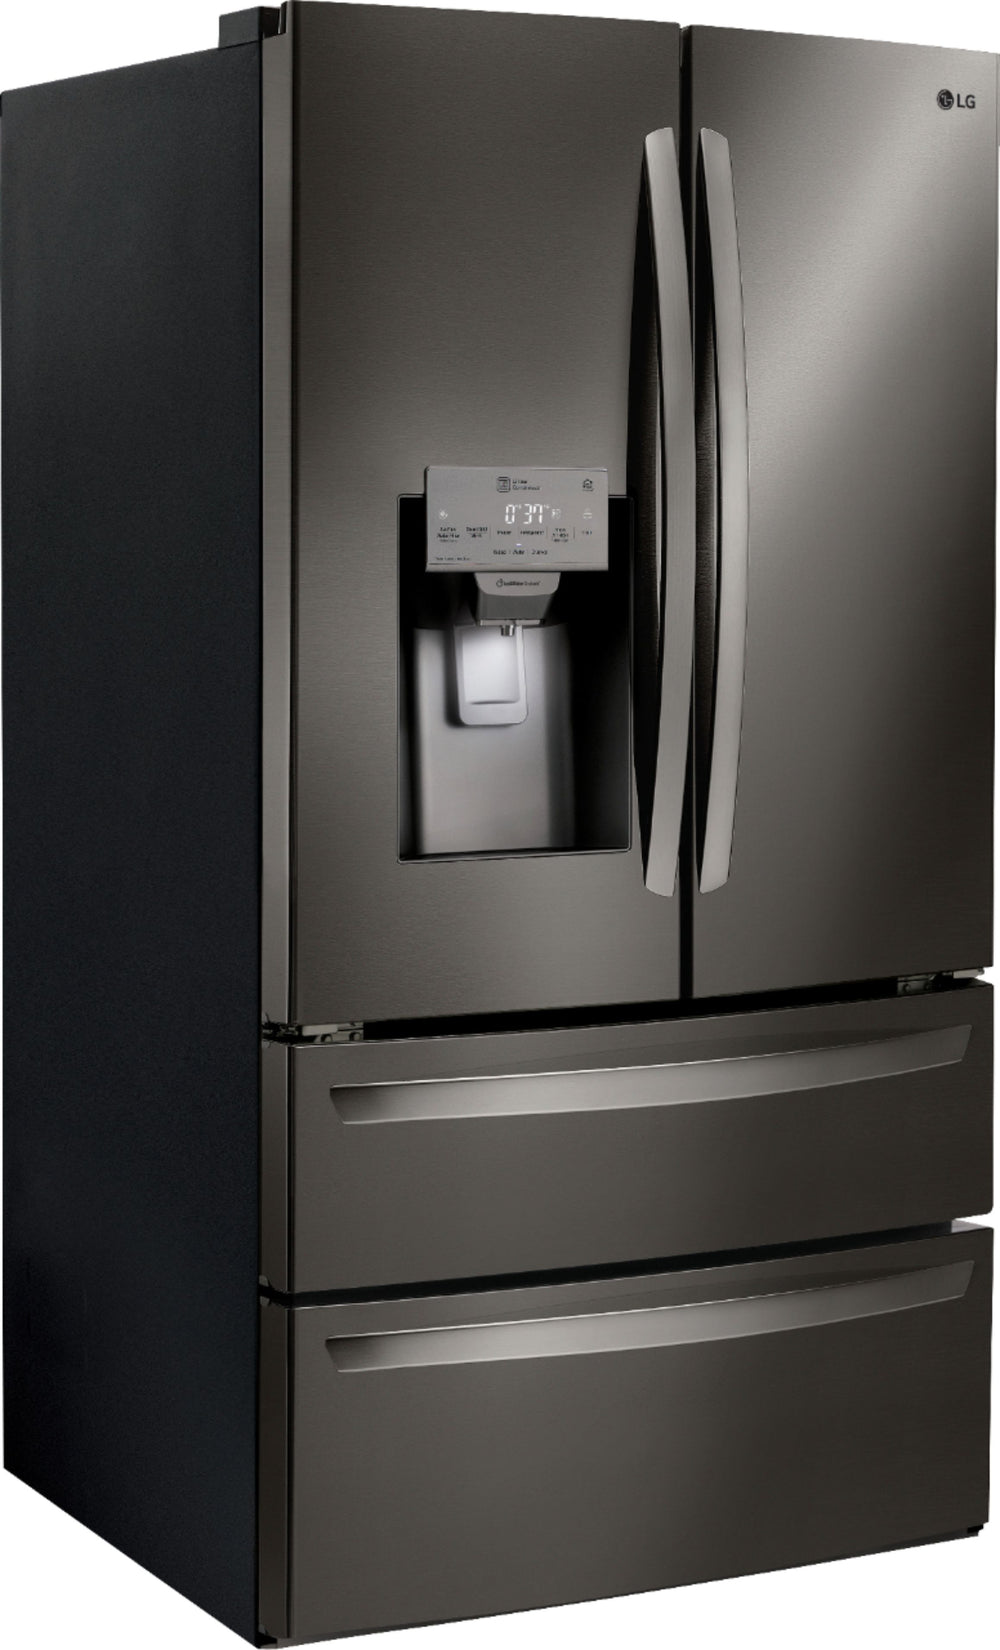 LG - 27.8 Cu. Ft. 4-Door French Door Smart Refrigerator with Smart Cooling System - Black stainless steel_1